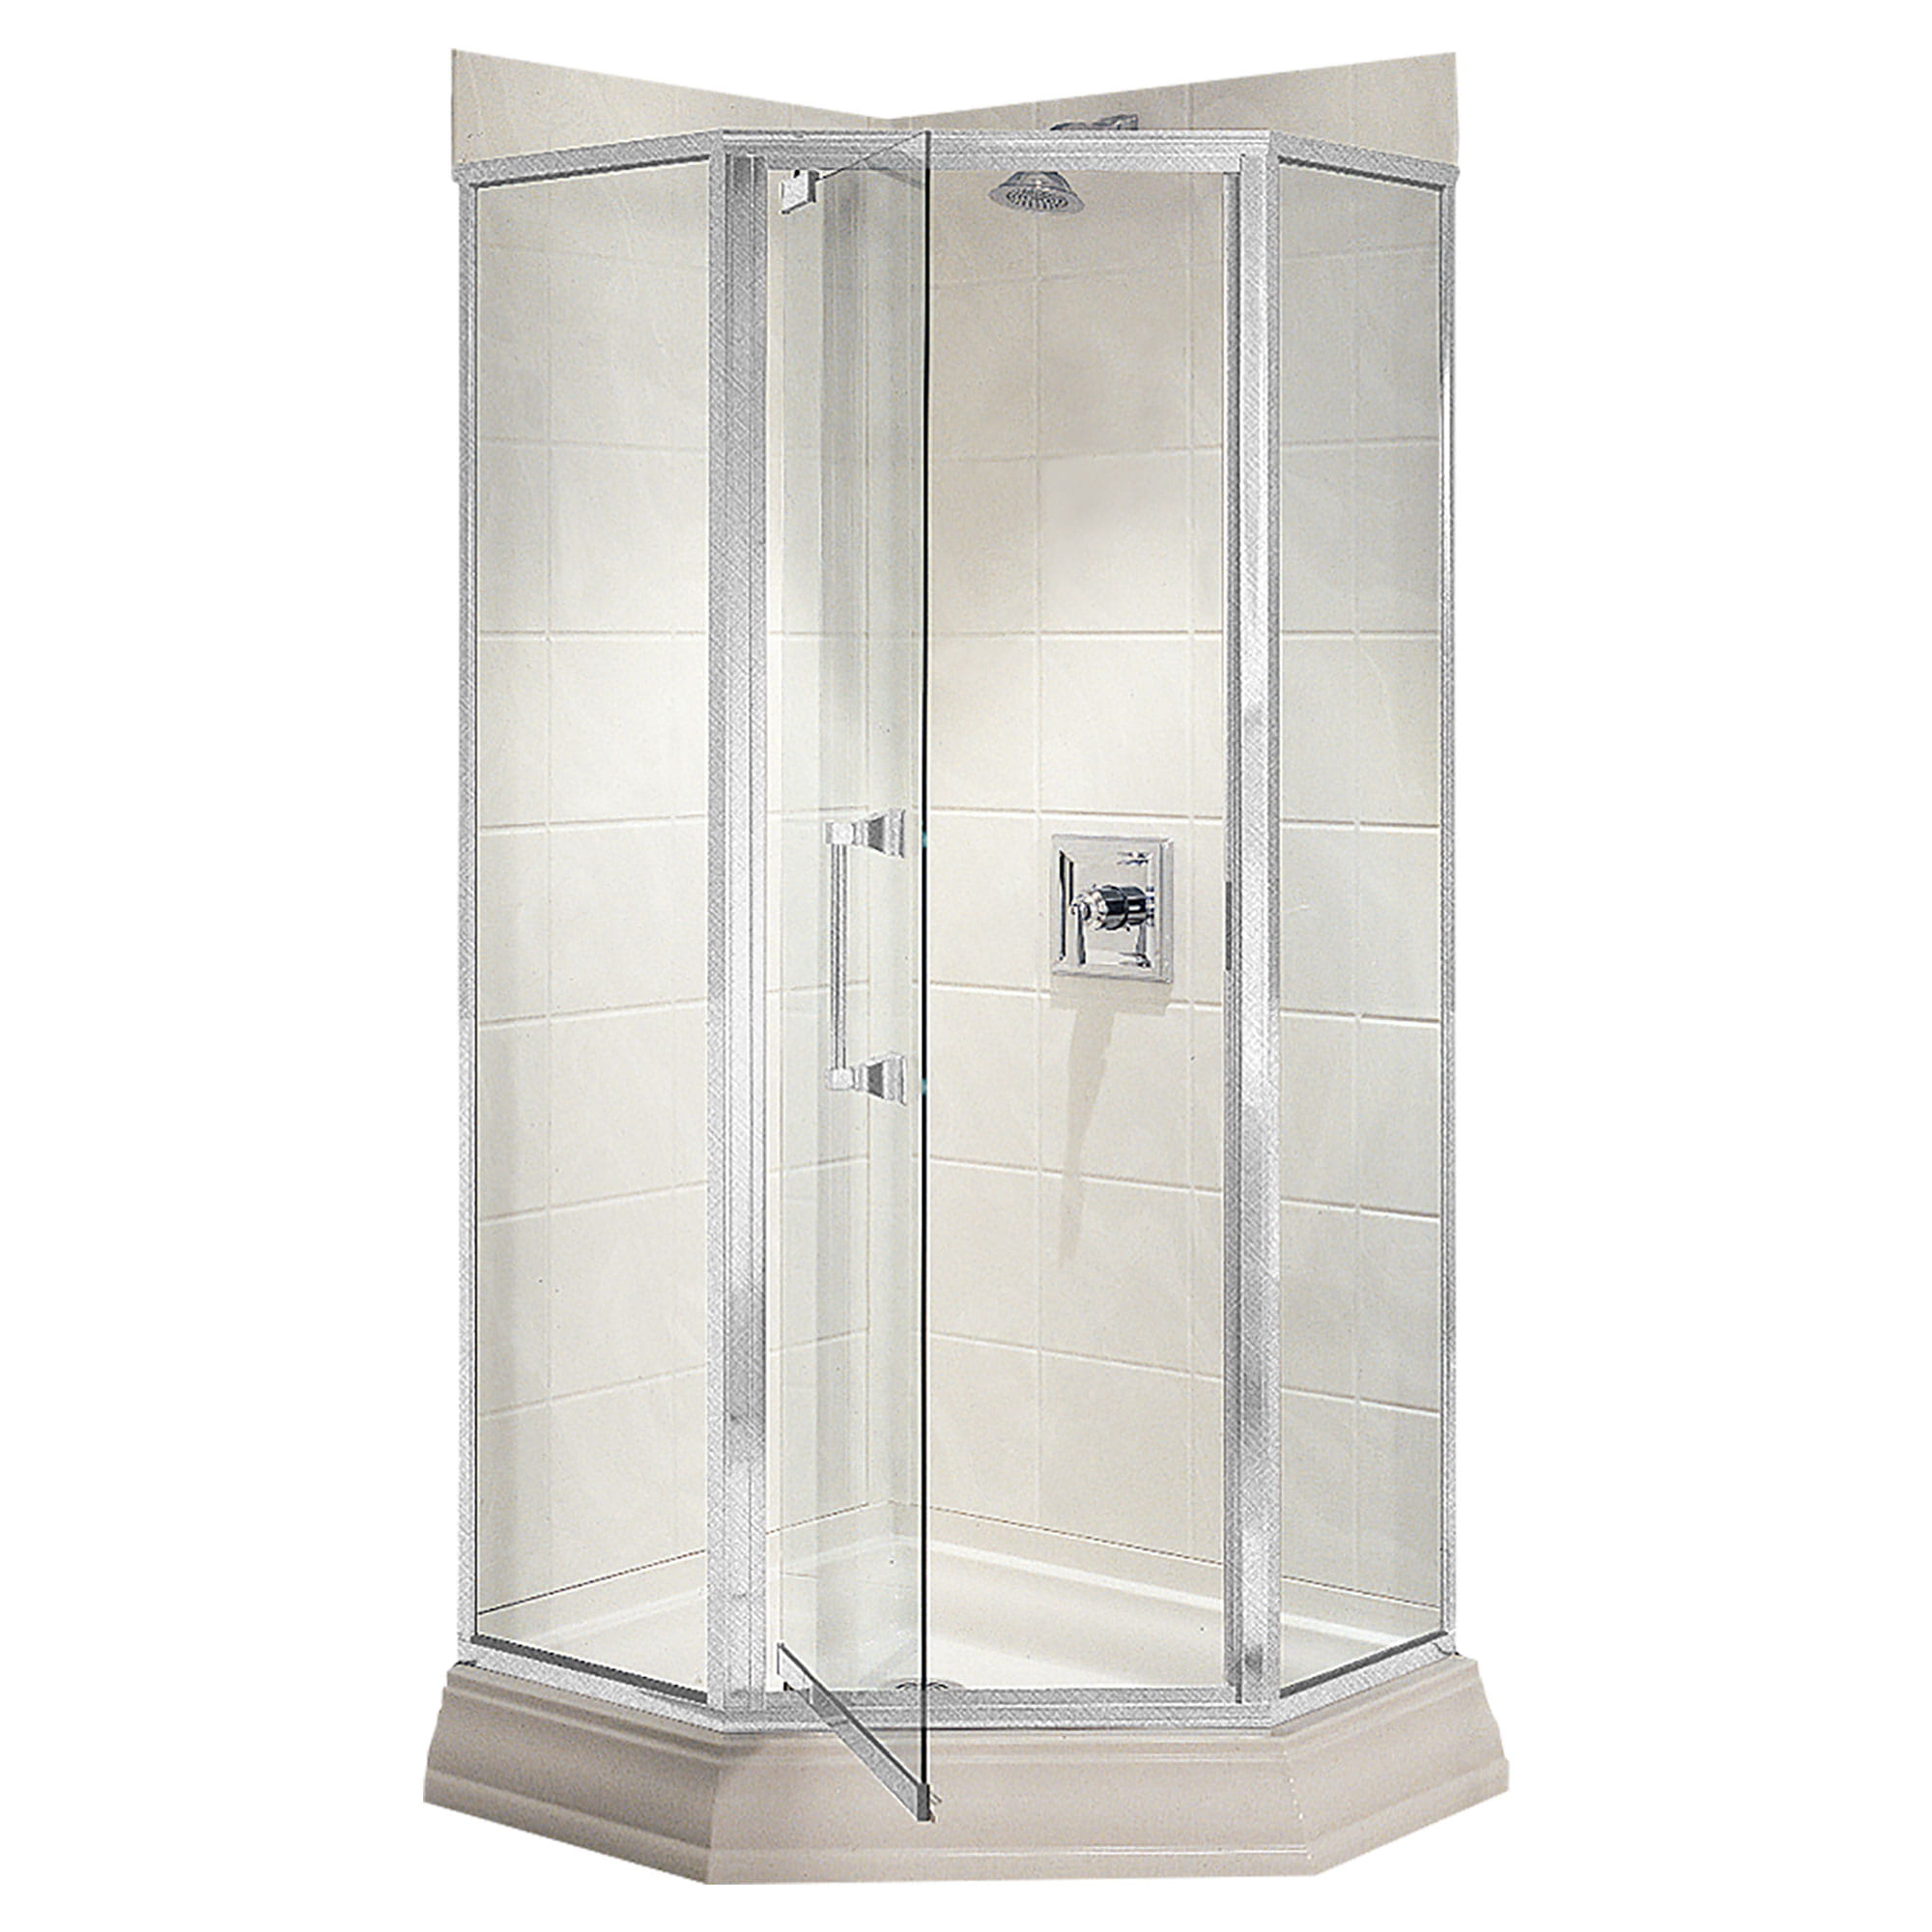 Town Square 38 Inch by 38 Inch Neo Angle Shower Base WHITE